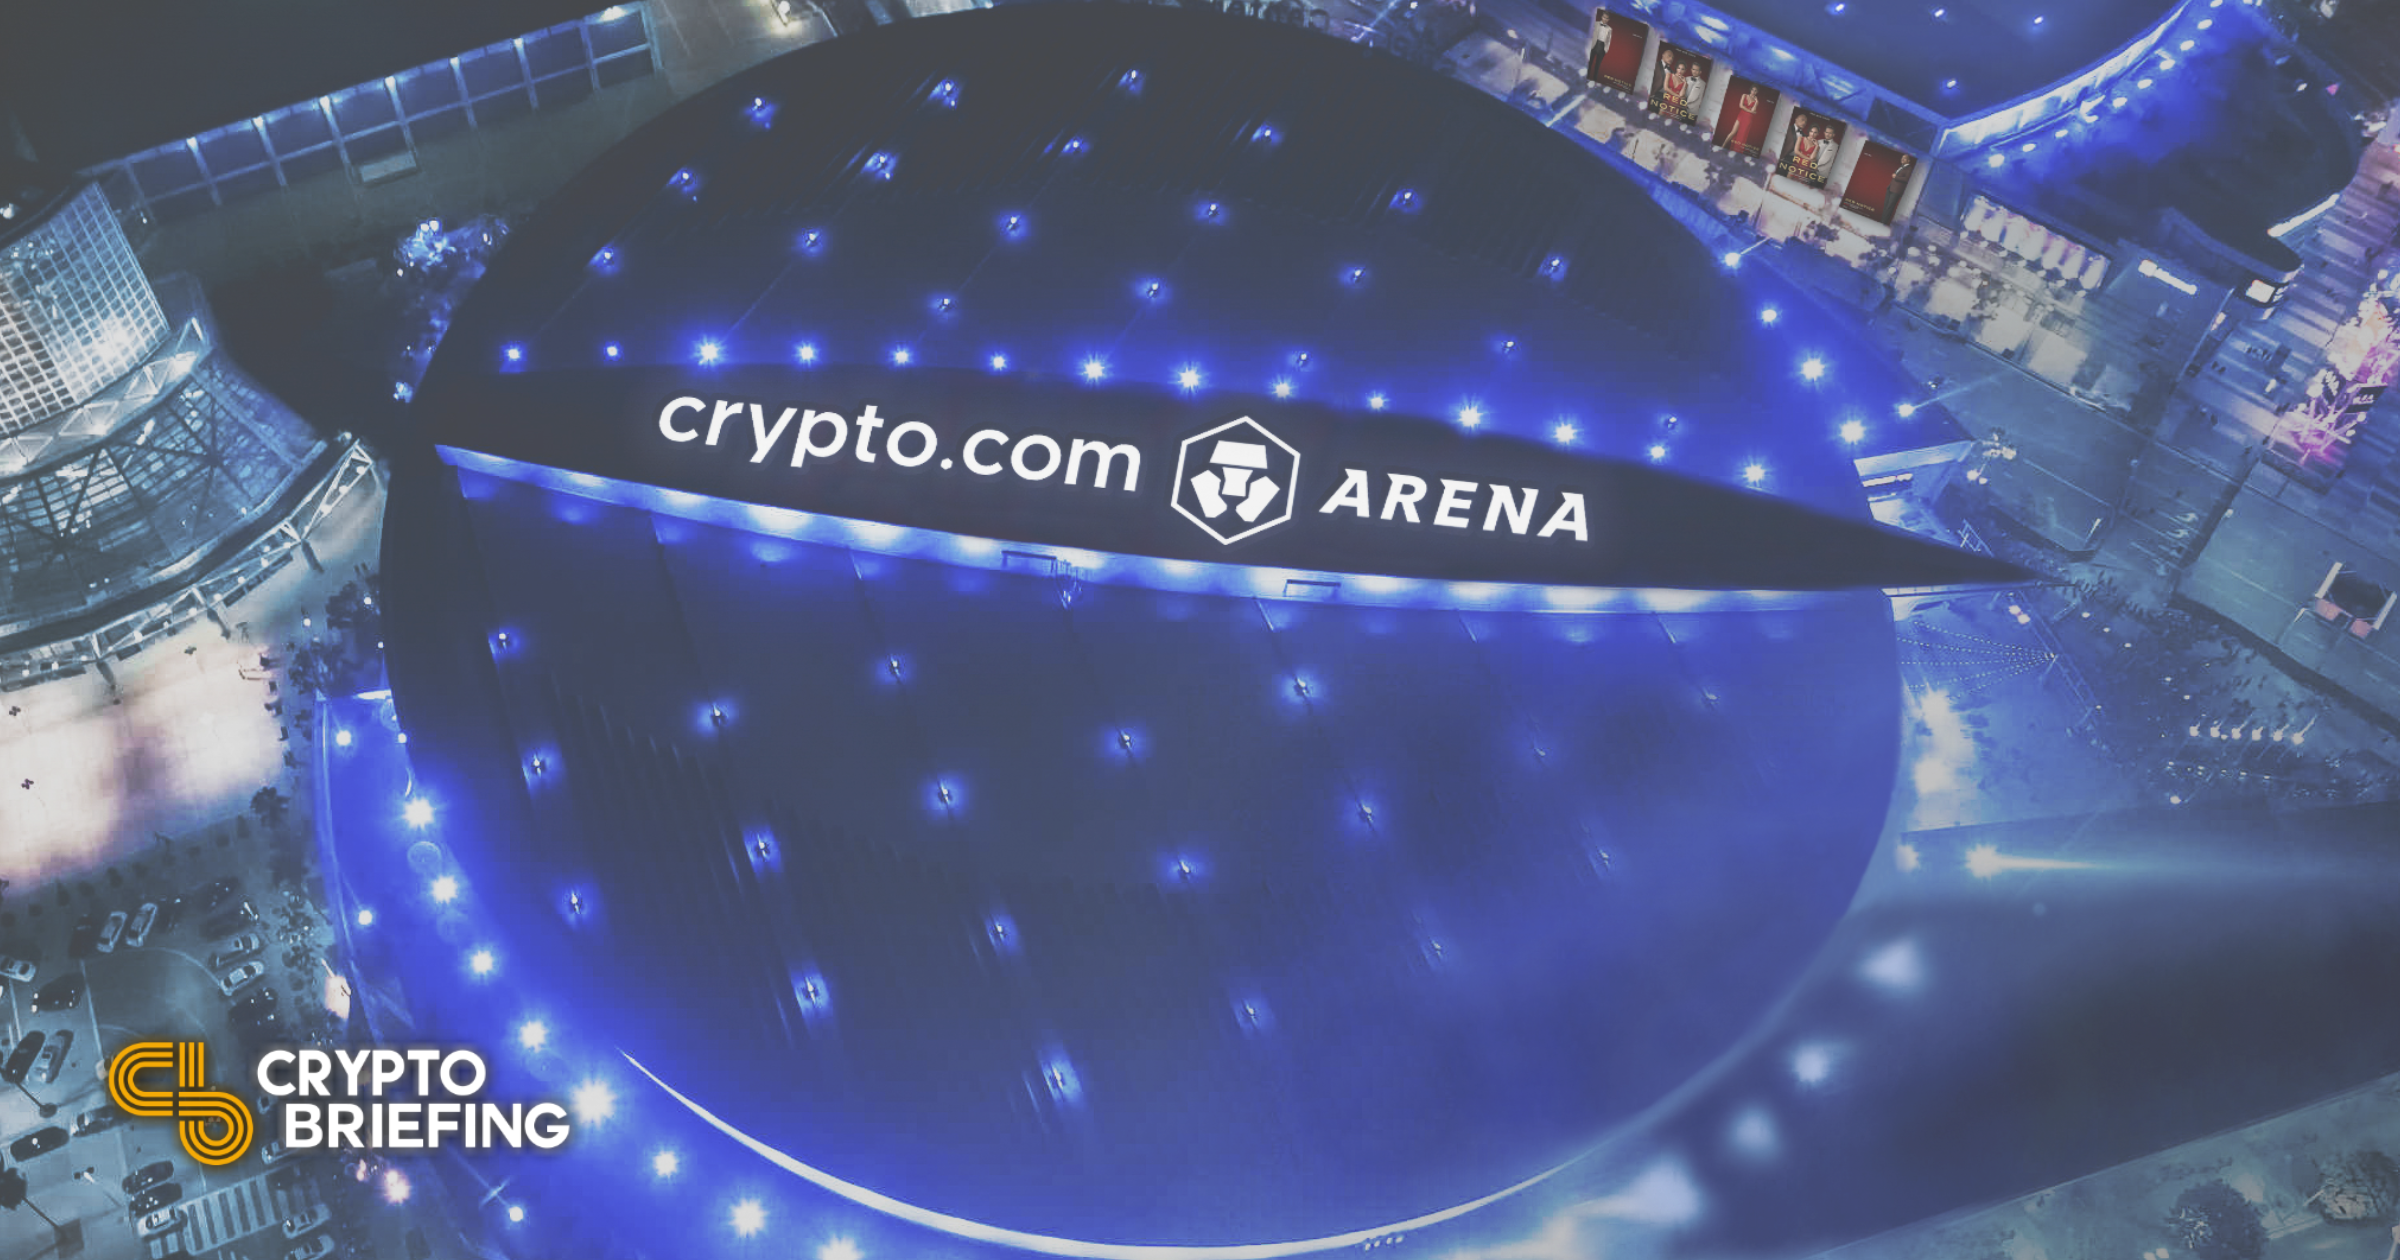 Home court of Lakers, Clippers to be renamed Crypto.com Arena